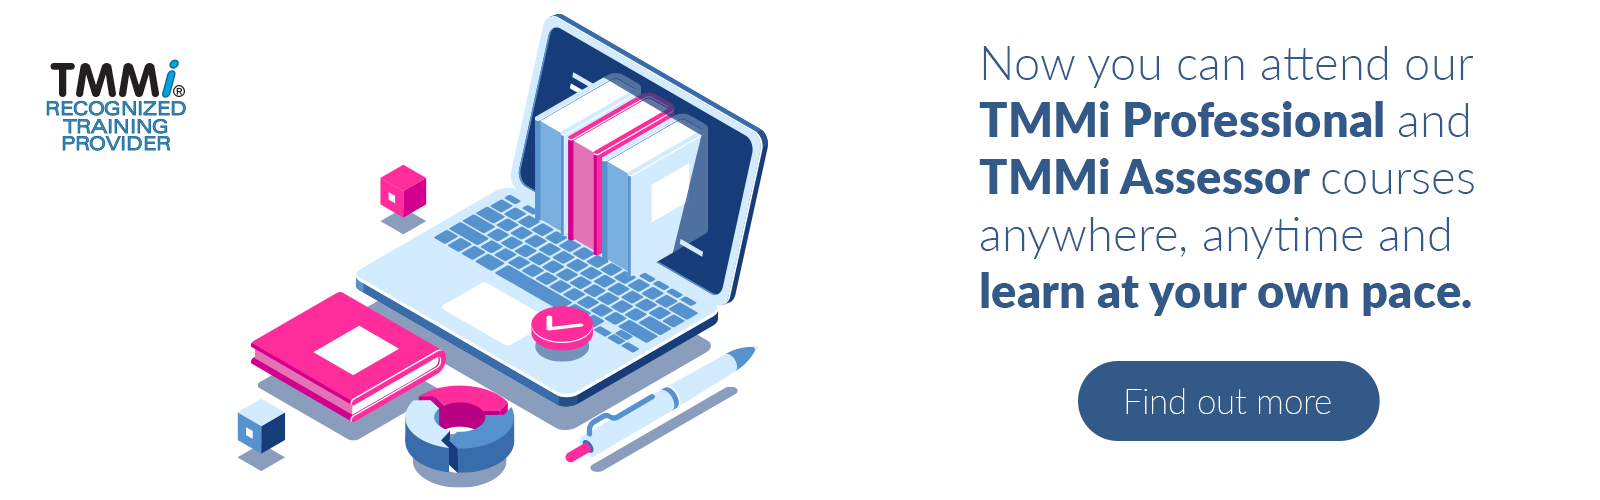 Find out more about our TMMi Professional and Assessor Training Courses